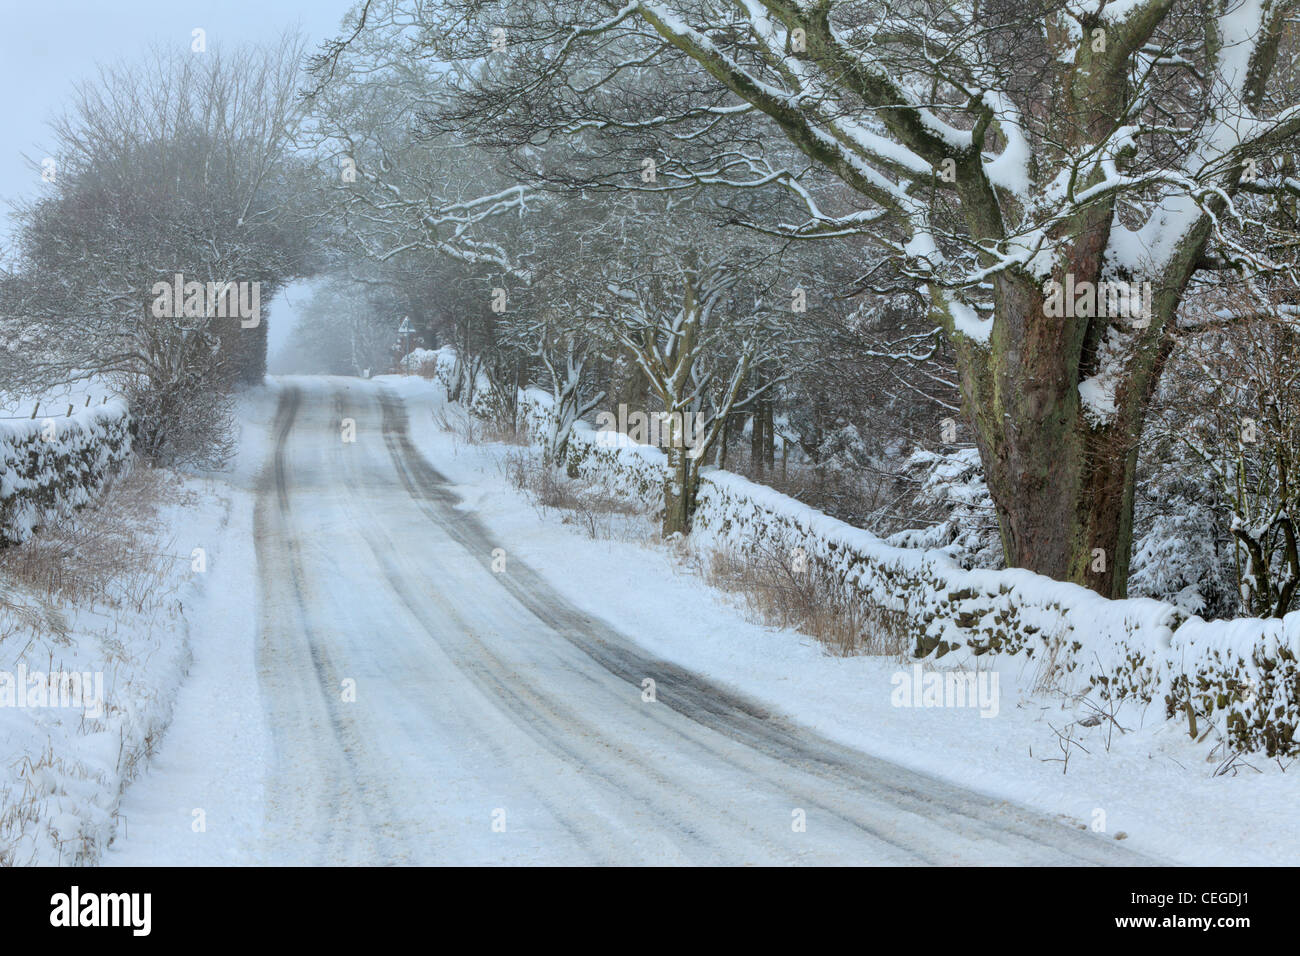 Snow covers the road and trees near Barden, Wharfedale, Yorkshire on a winter morning Stock Photo